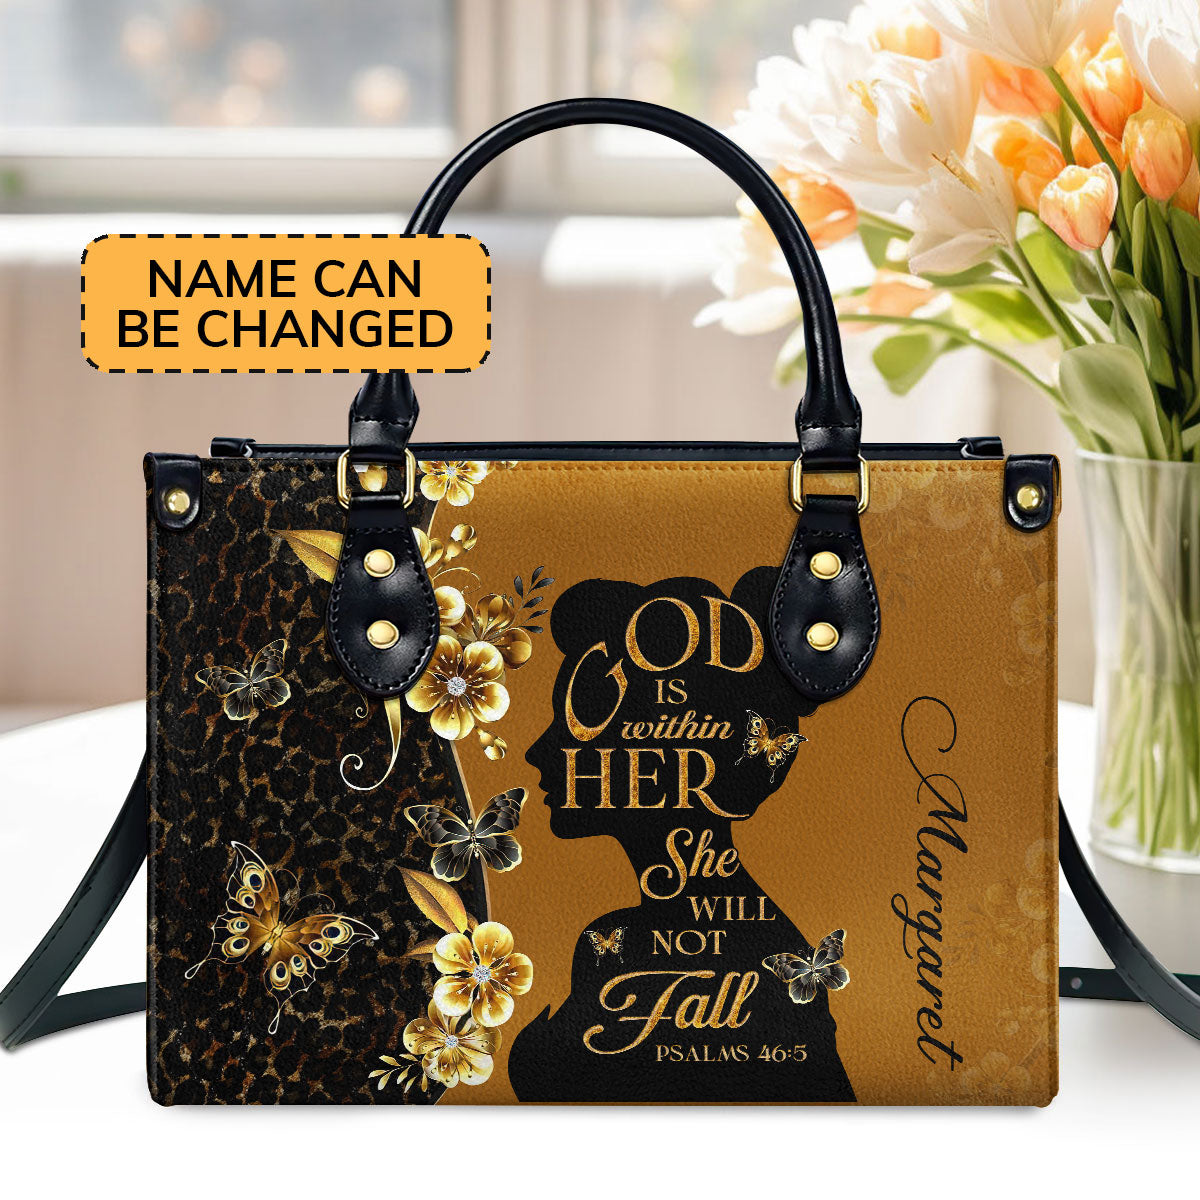 God Is Within Her  Personalized Leather Handbag With Zipper - Inspirational Gift Christian Ladies